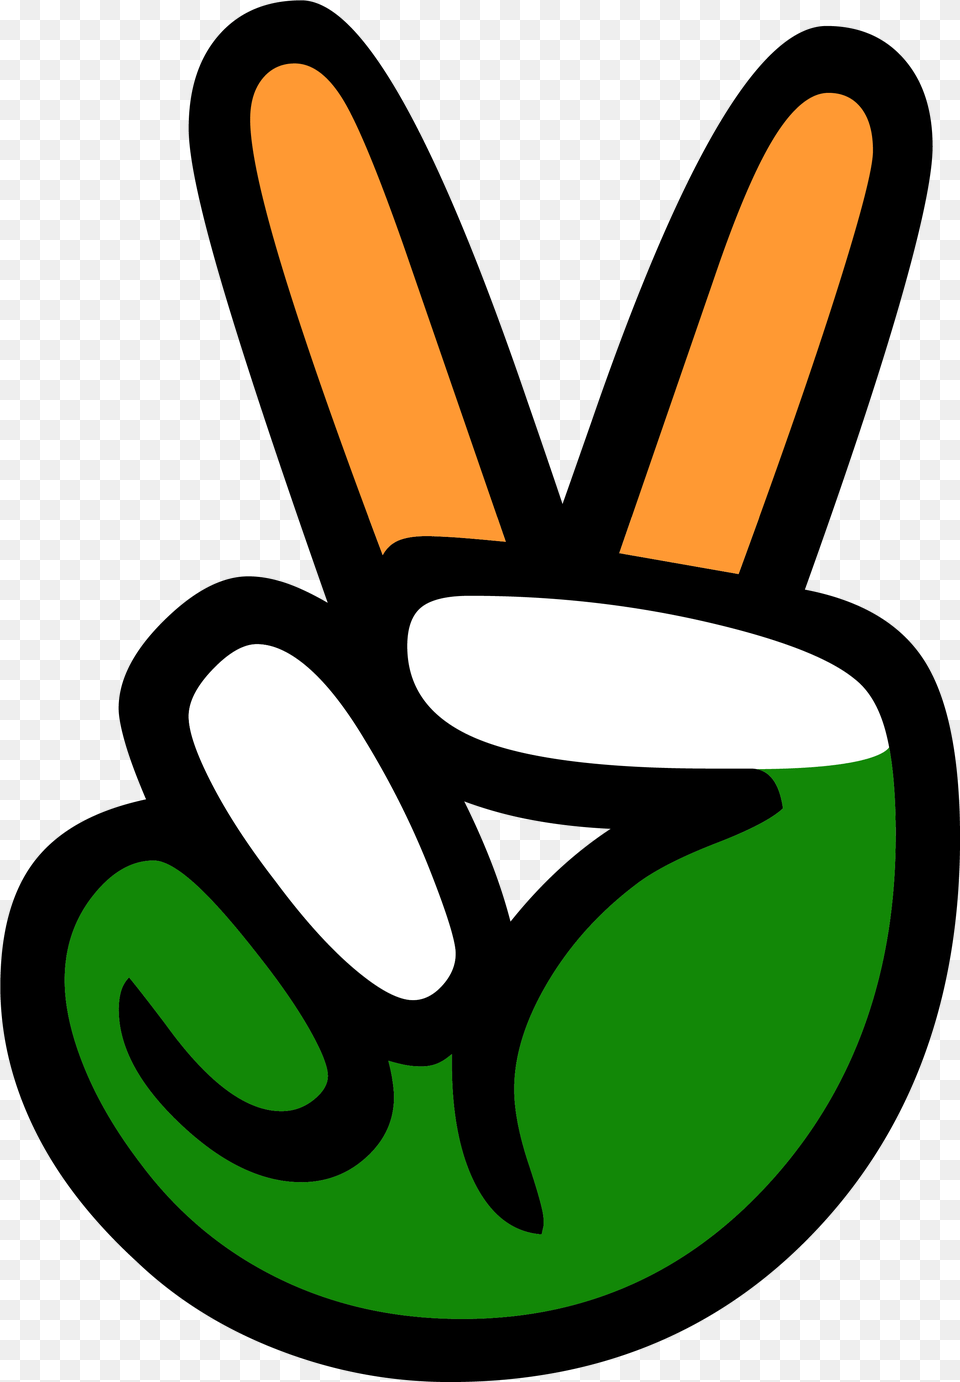 The Collective Finger Peace Sign Transparent, Food, Fruit, Plant, Produce Png